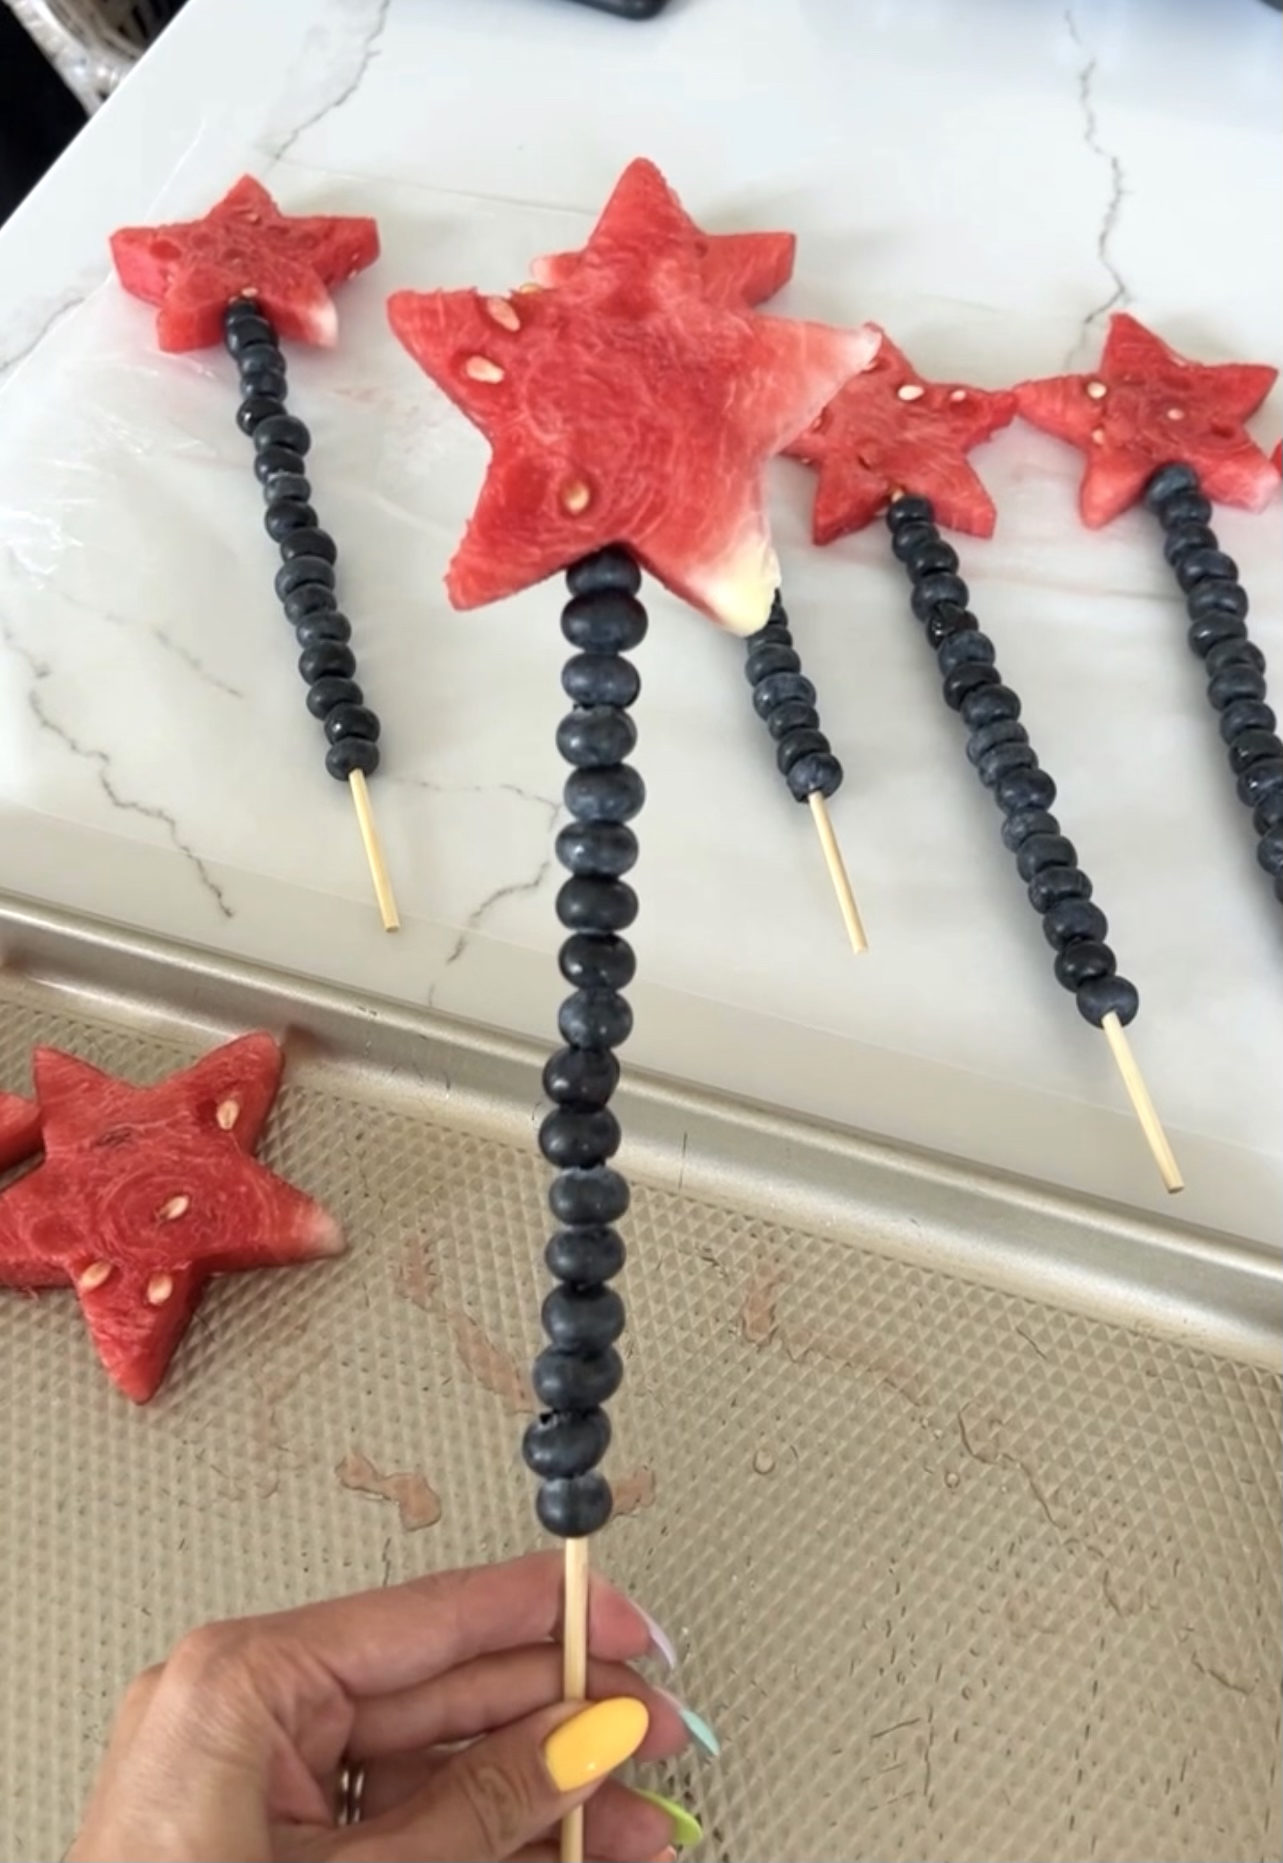 Fourth of July, 5 party hacks, 4th of July party, festive fruit, color coordinated fruit, charcuterie spread, party spread, charcuterie board, Sams club, 4th of July, 4th of July charcuterie board, fruit sparklers, watermelon stars, blueberries